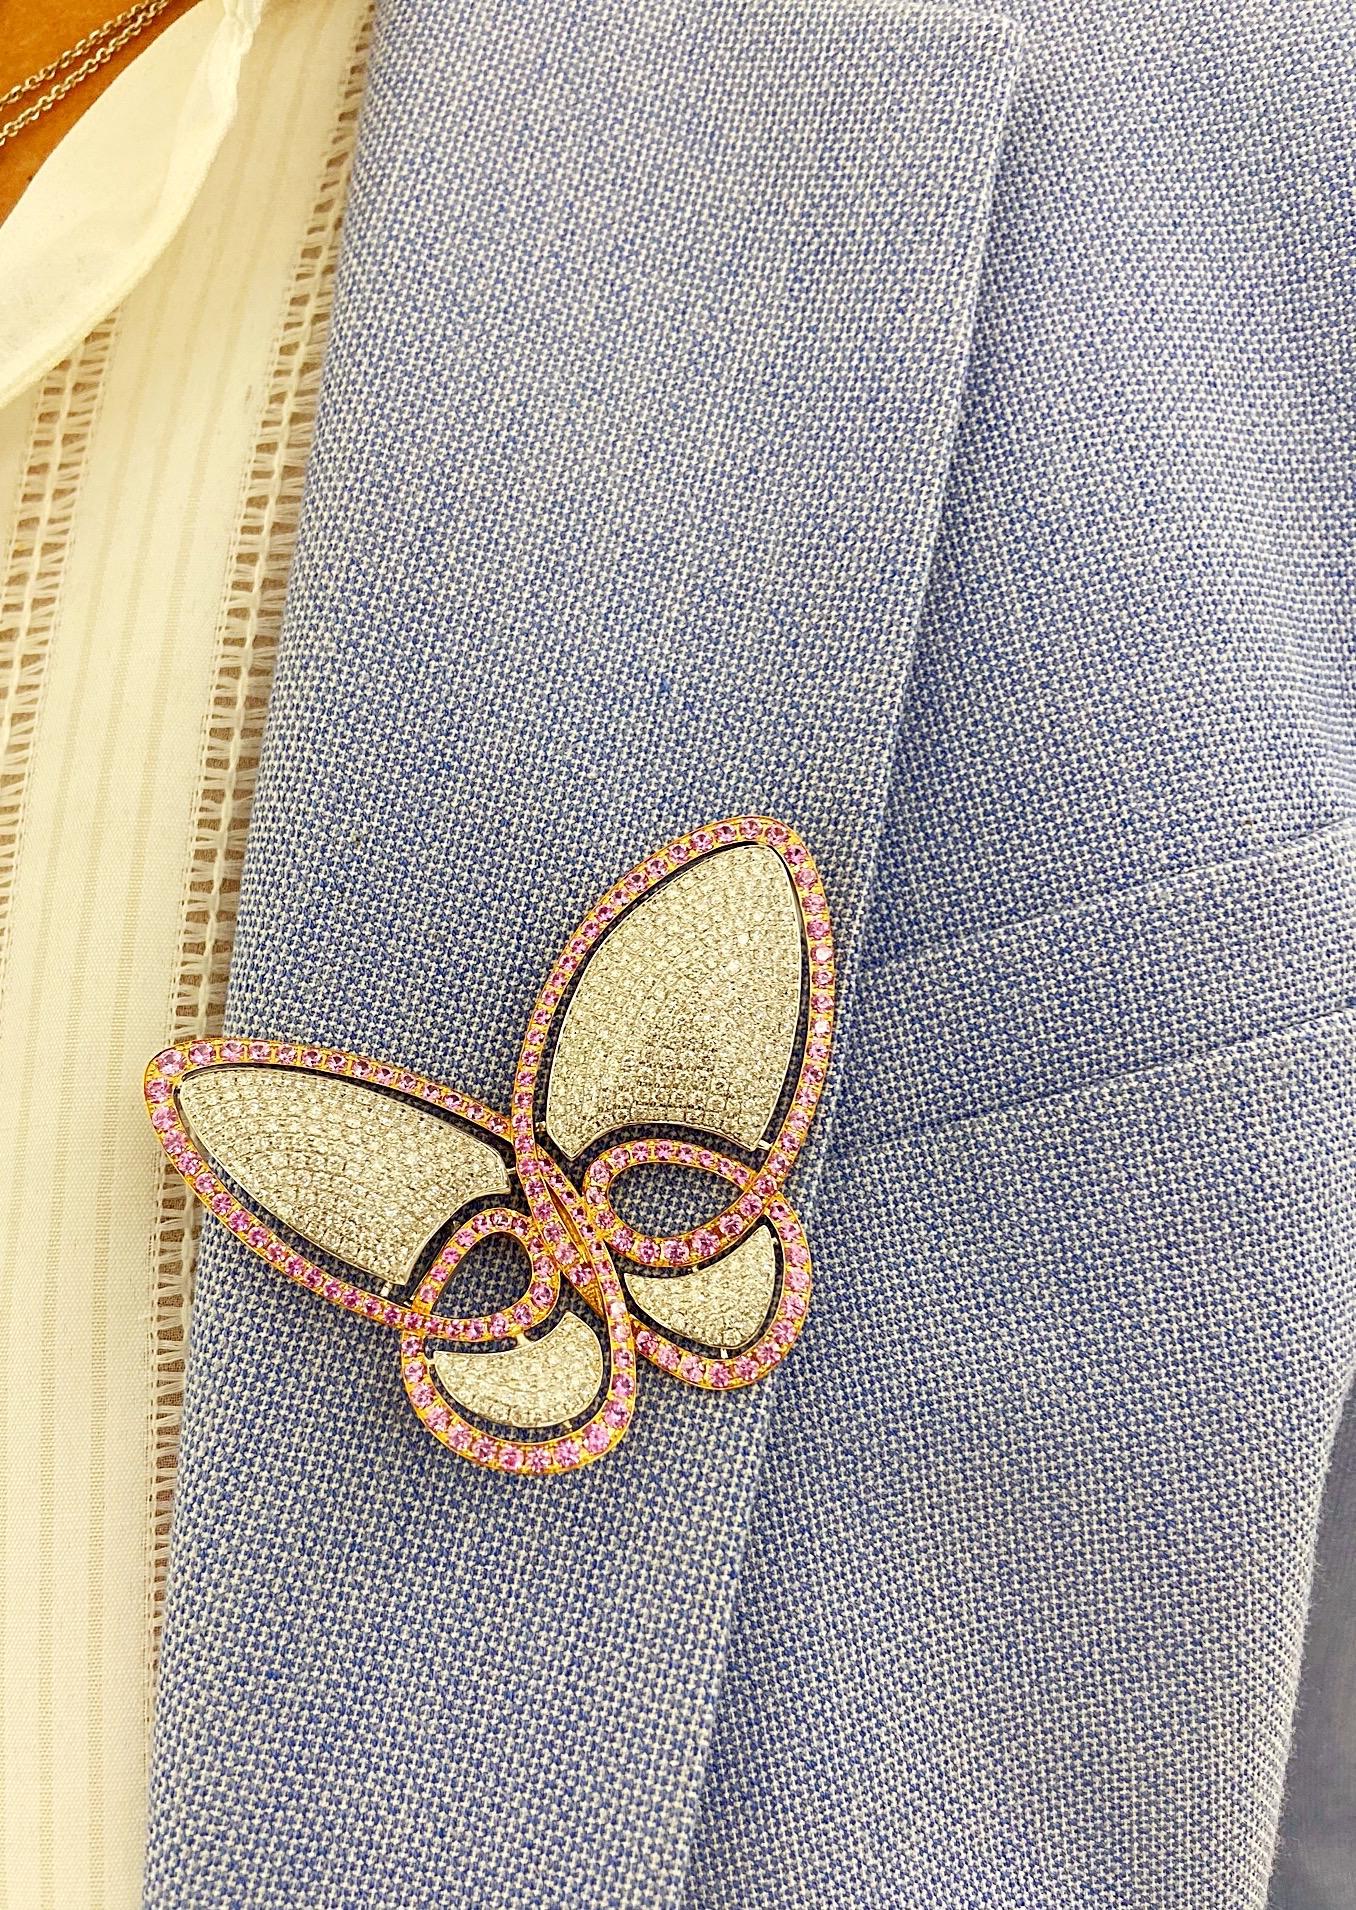 This lovely 18 karat white gold butterfly brooch is impeccably pave set with Round Brilliant Cut Diamonds . The outer trim of the butterfly is 18 karat rose gold set with Round Brilliant Cut Pink Sapphires. The brooch measures 2.5